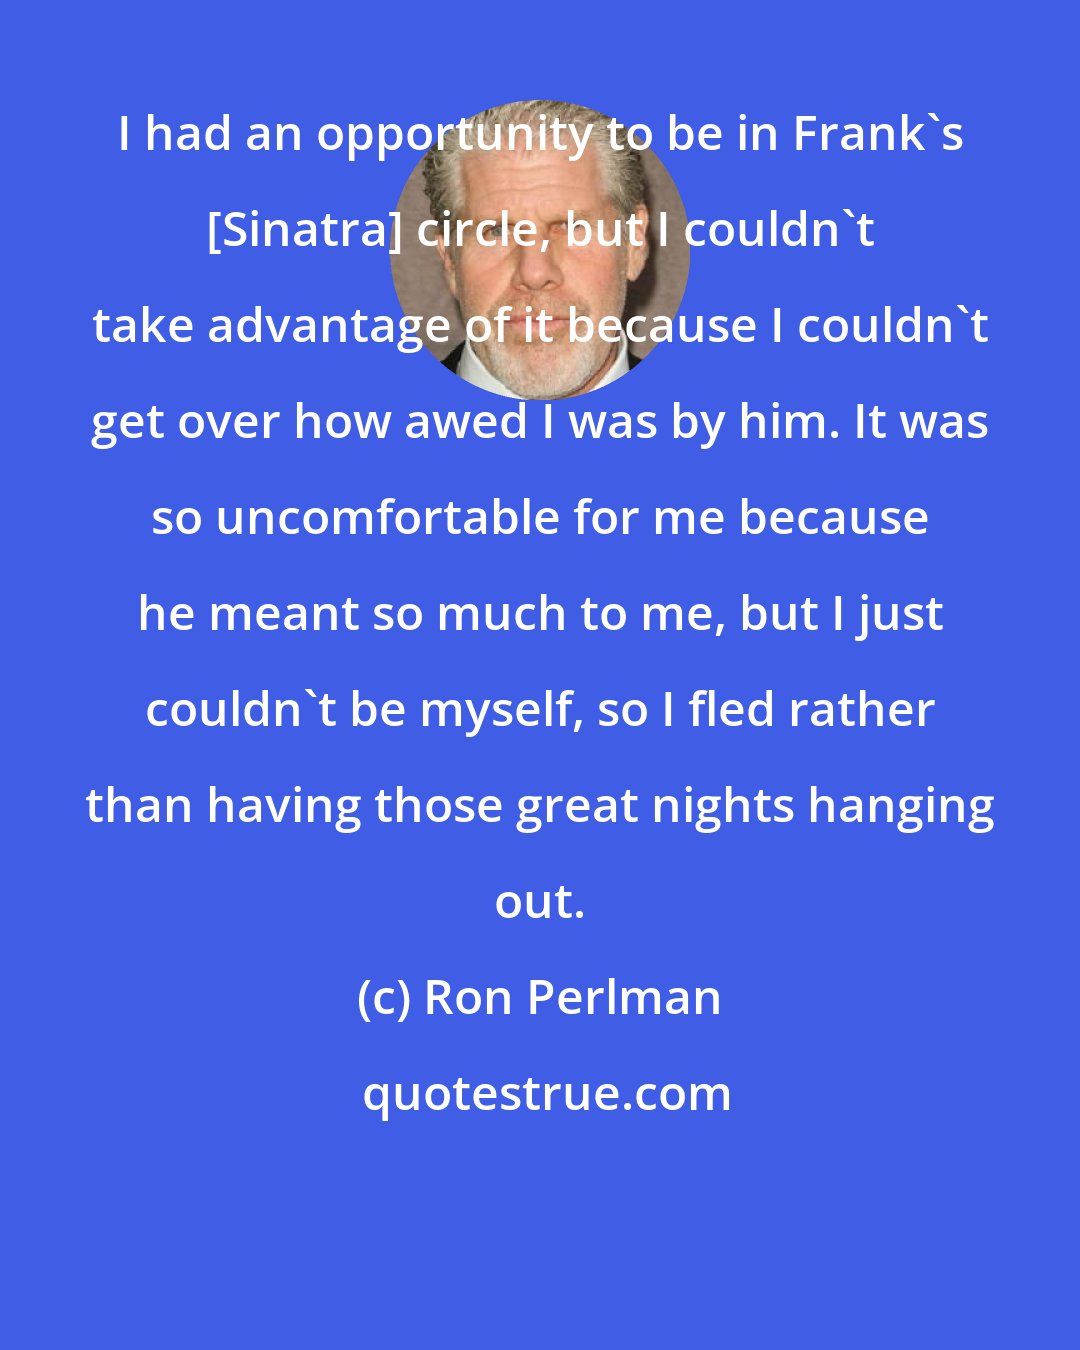 Ron Perlman: I had an opportunity to be in Frank's [Sinatra] circle, but I couldn't take advantage of it because I couldn't get over how awed I was by him. It was so uncomfortable for me because he meant so much to me, but I just couldn't be myself, so I fled rather than having those great nights hanging out.